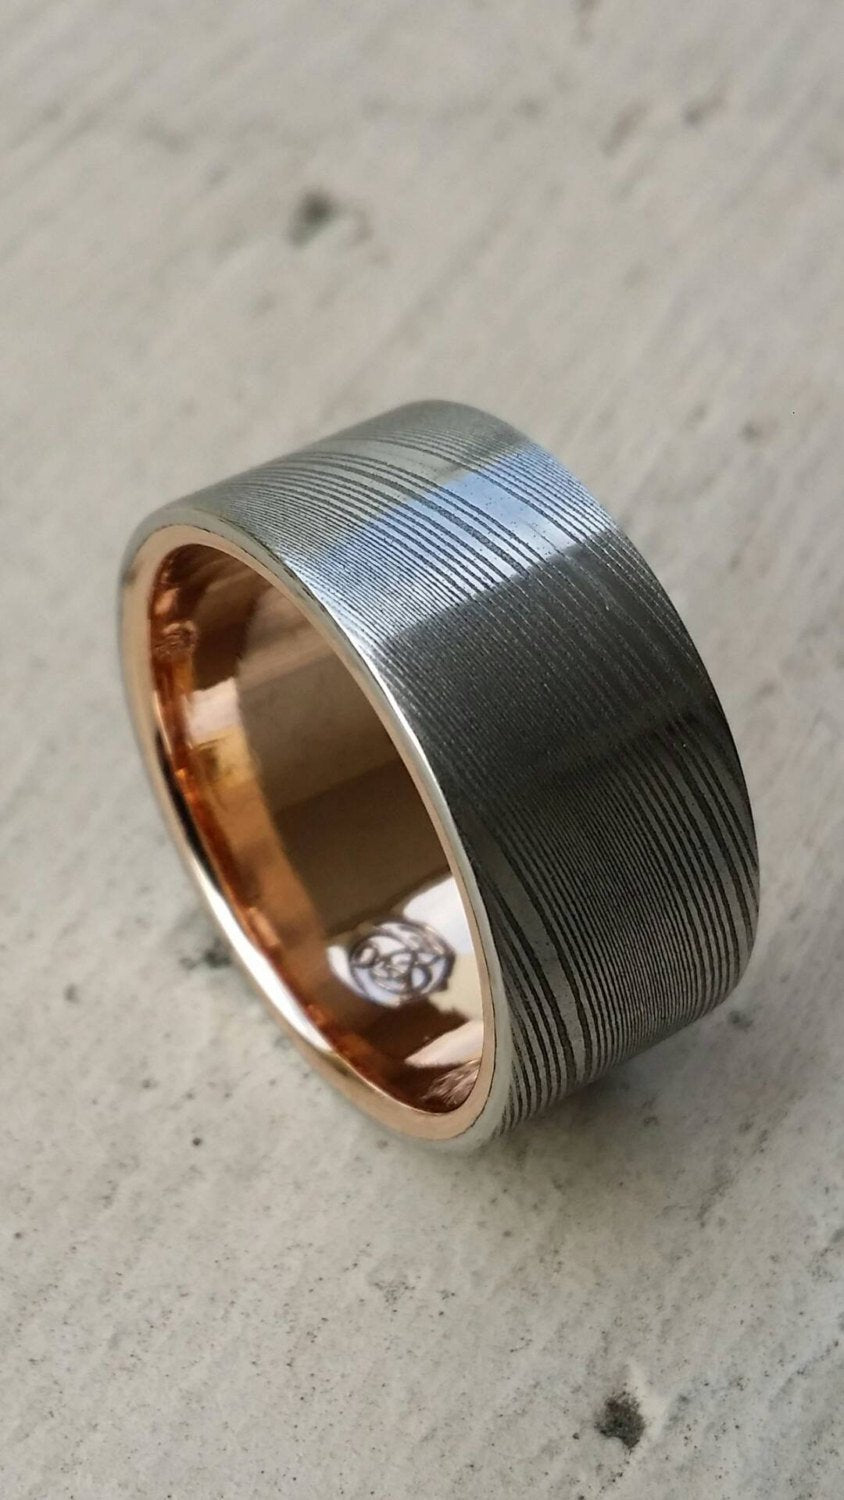 Gold lined & Stainless Damascus steel rose 10mm wide